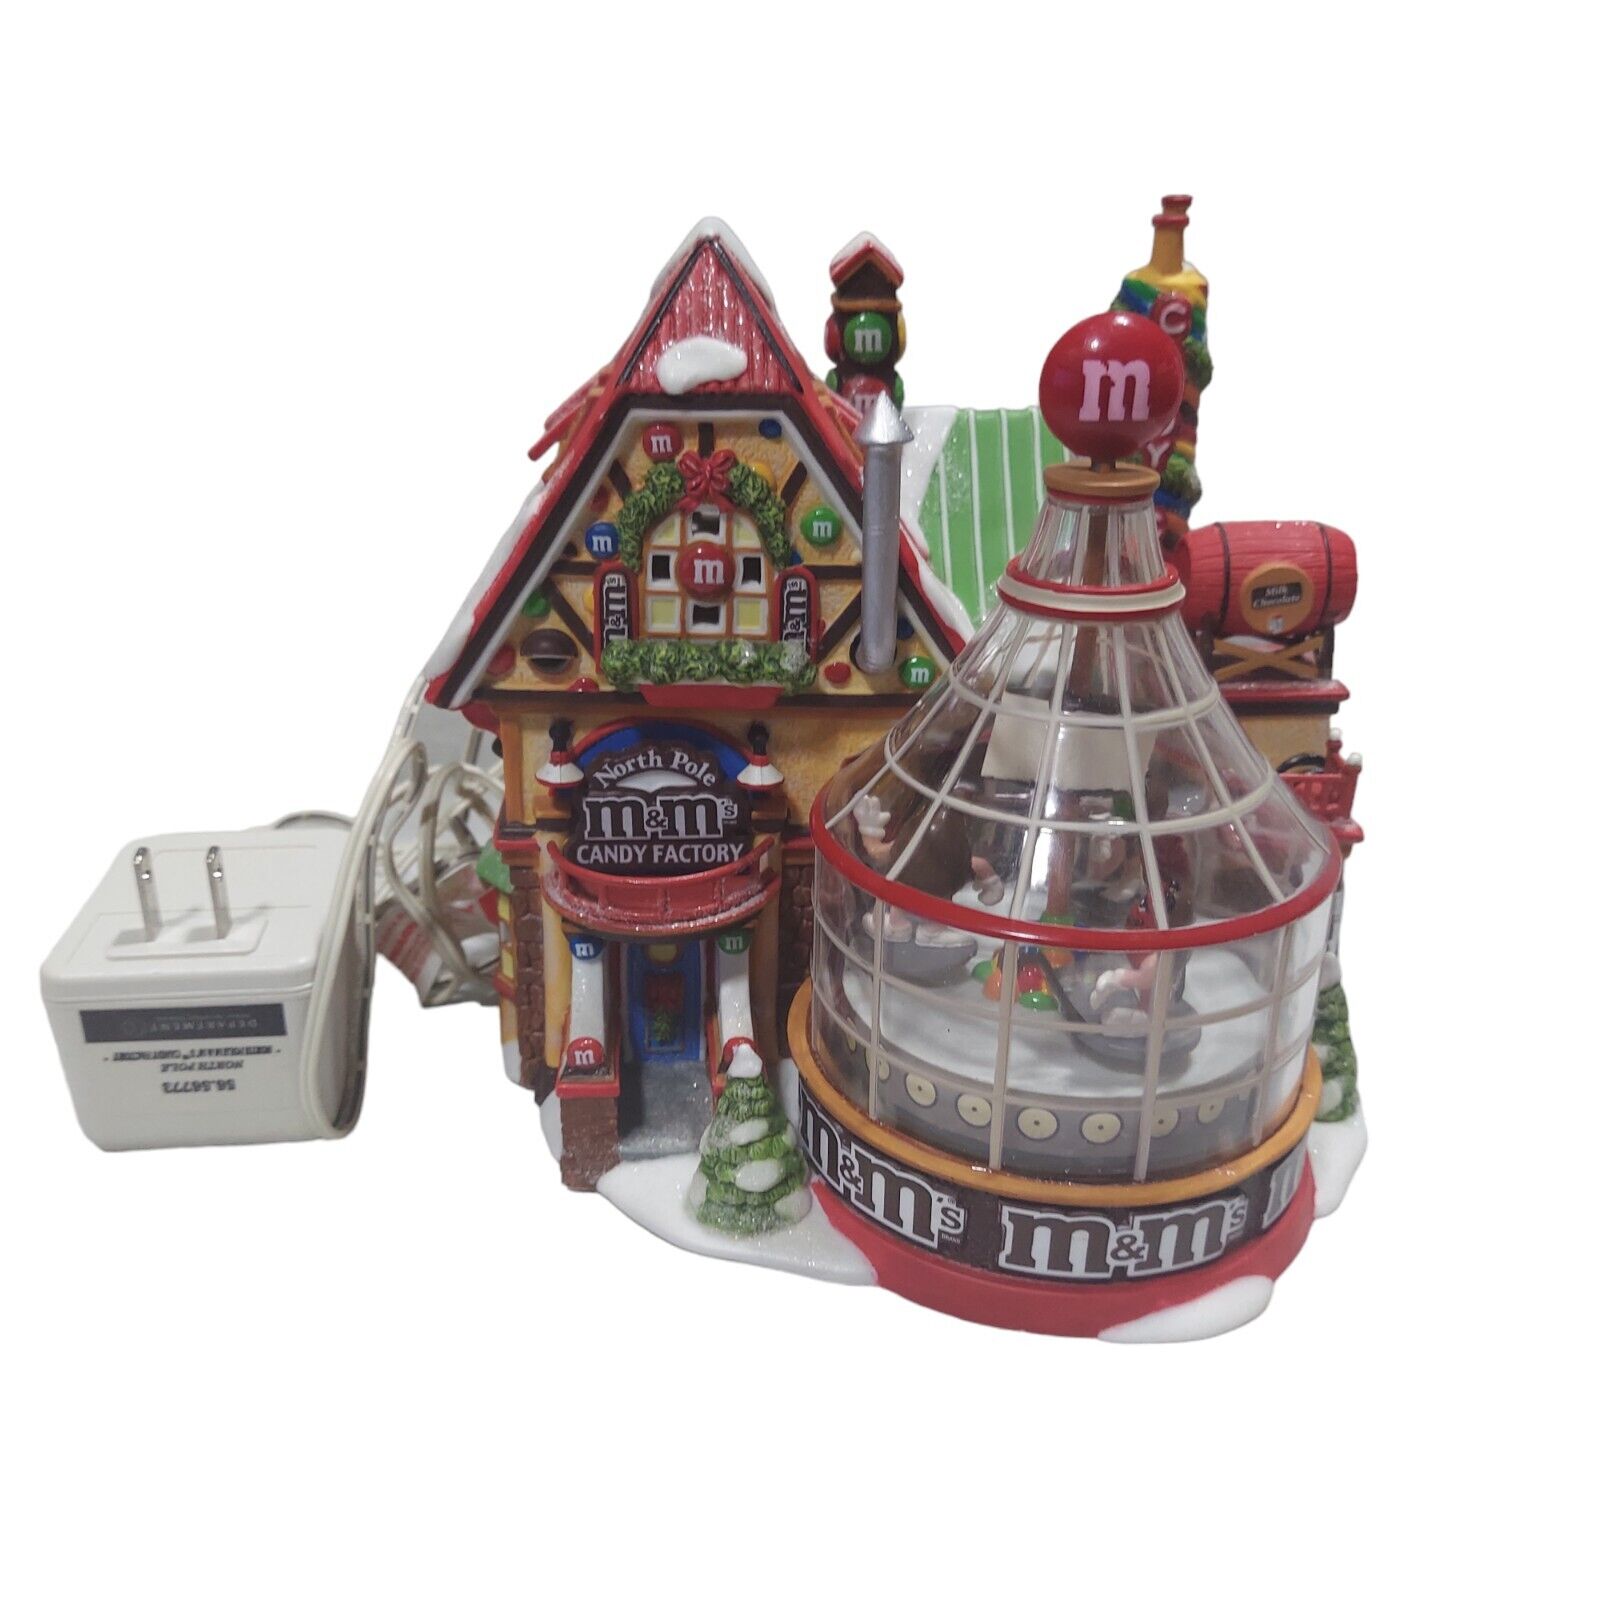 2004 Dept 56 North Pole Series M&M Candy Factory 56773 - Please See Notes Below